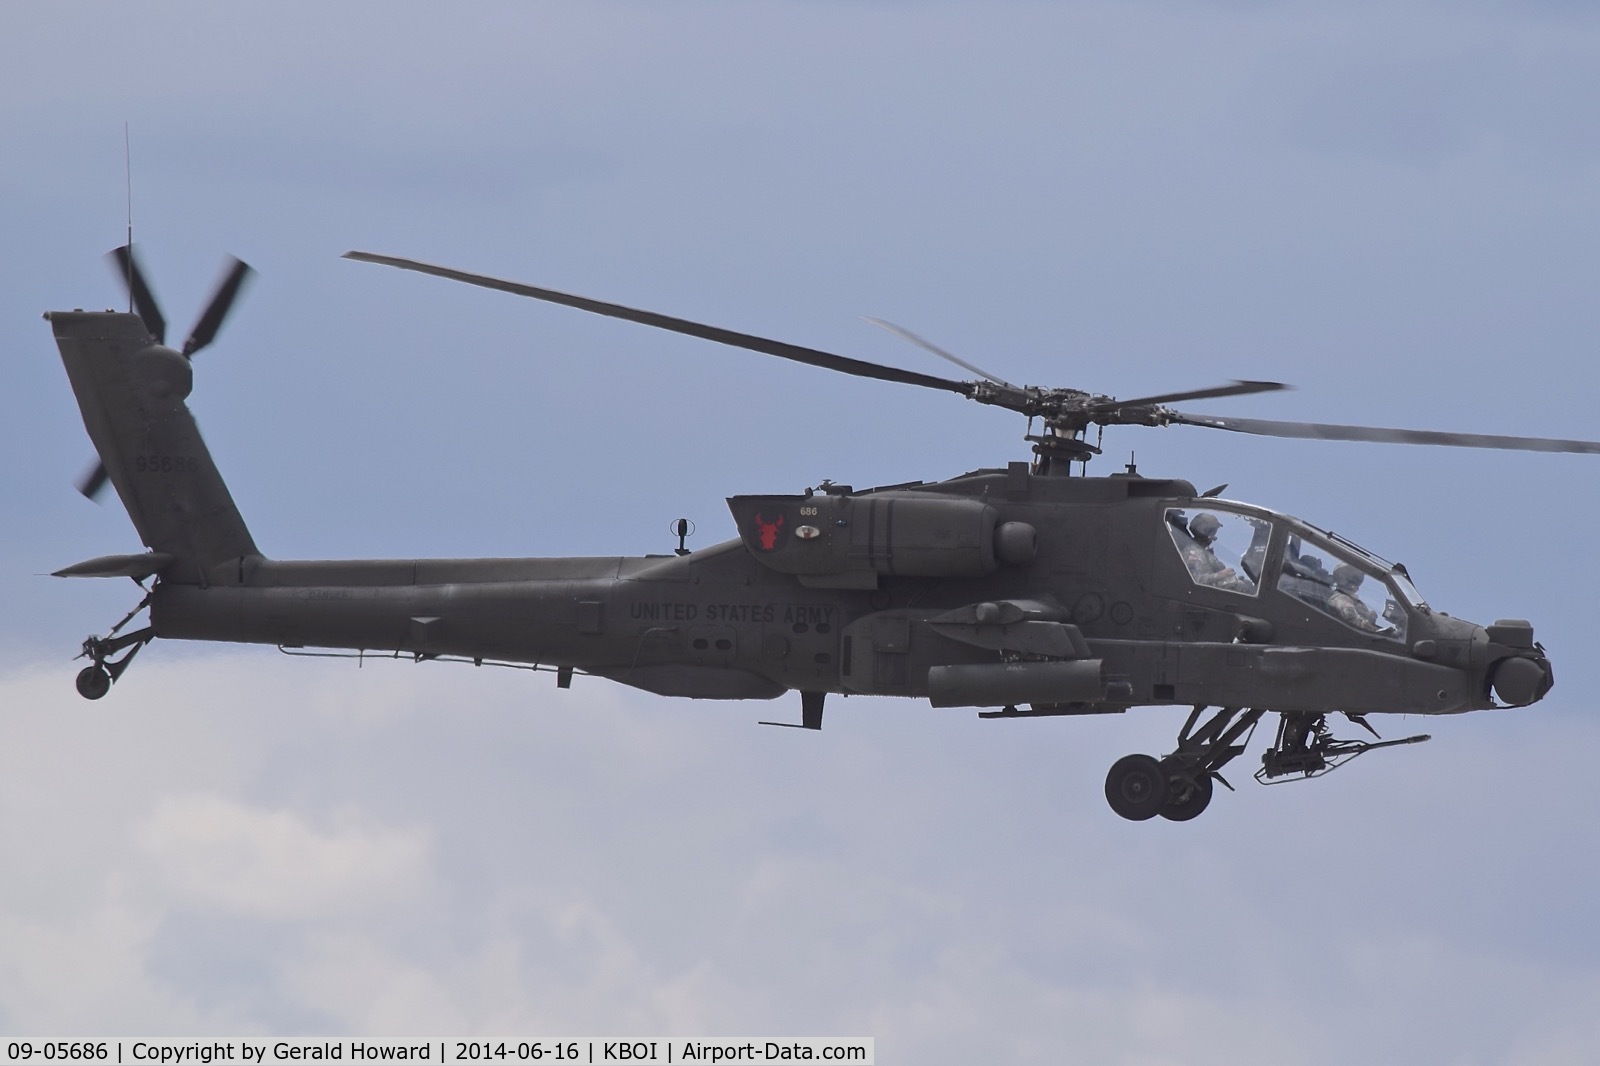 09-05686, 2009 Boeing AH-64D Longbow Apache C/N PVD686, Departing BOI.  1-183rd AVN BN, Idaho Army National Guard. All AH-64s were transferred back to the regular Army in 2016.